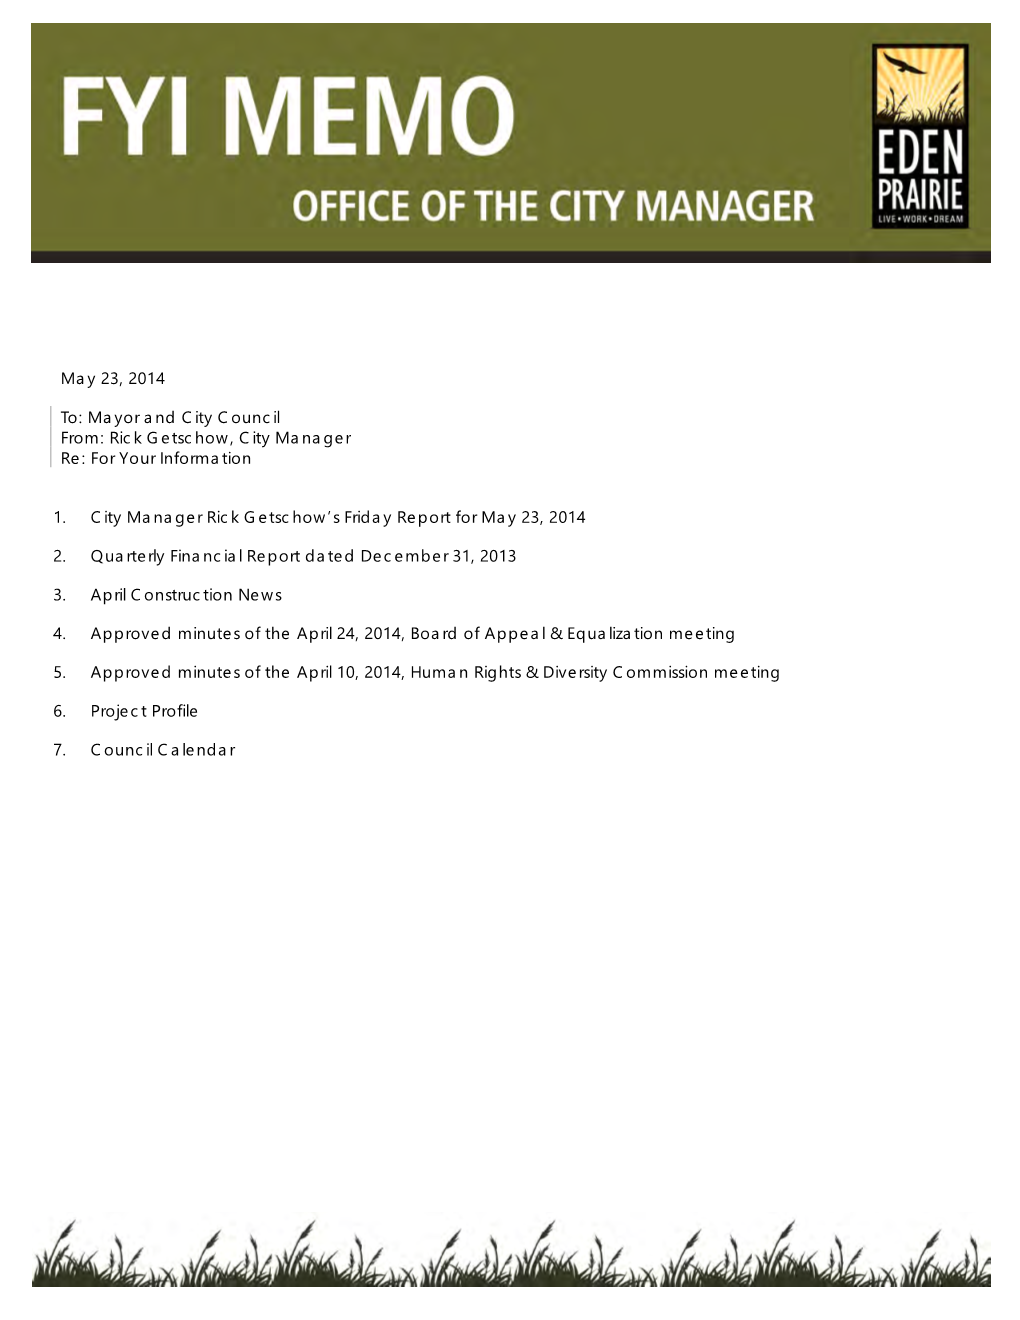 Rick Getschow, City Manager Re: for Your Information